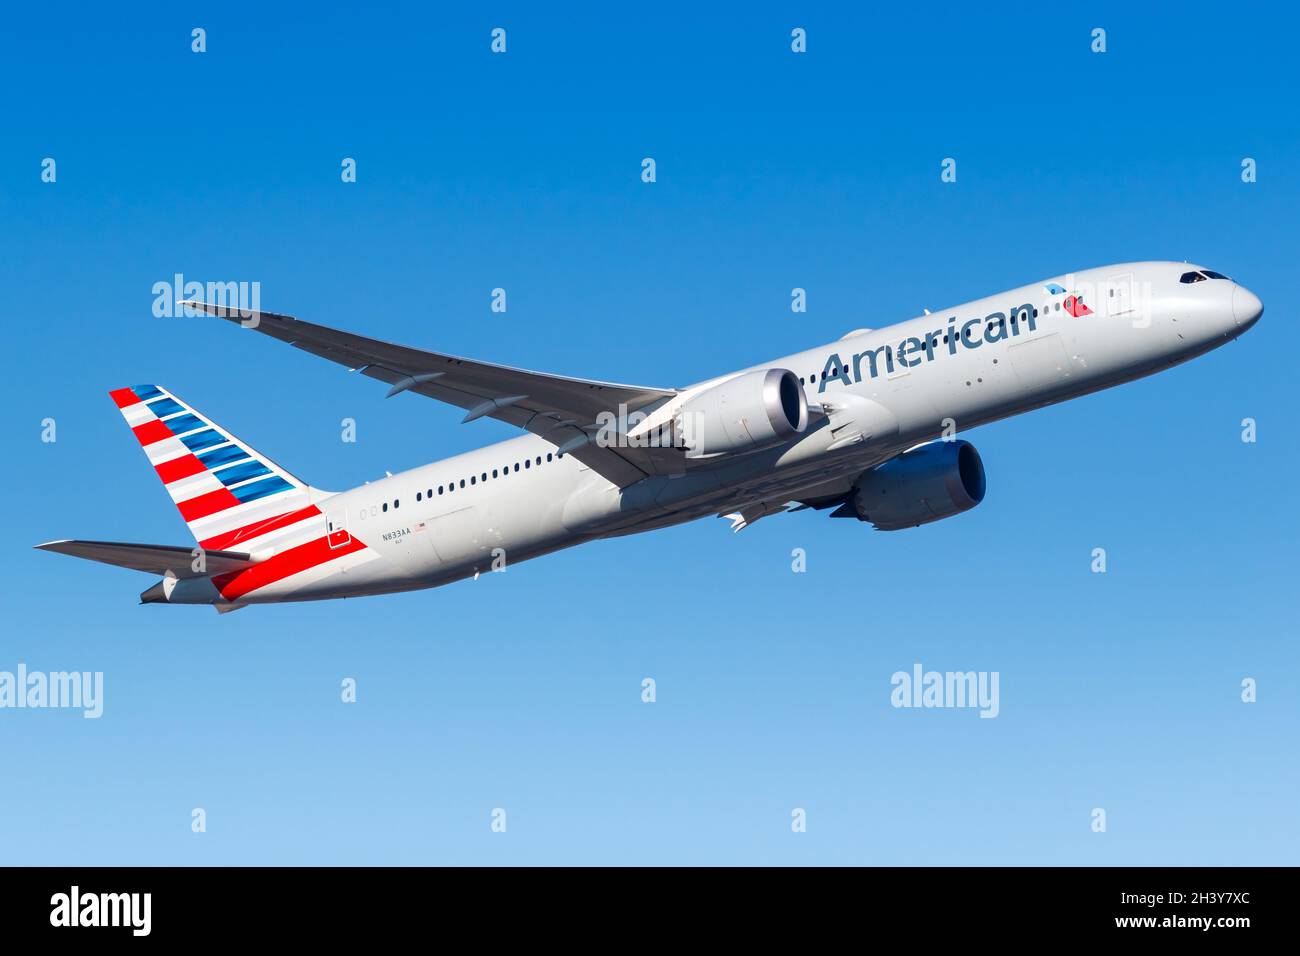 American Airlines Boeing 787-9 Dreamliner aircraft Frankfurt Airport in Germany Stock Photo